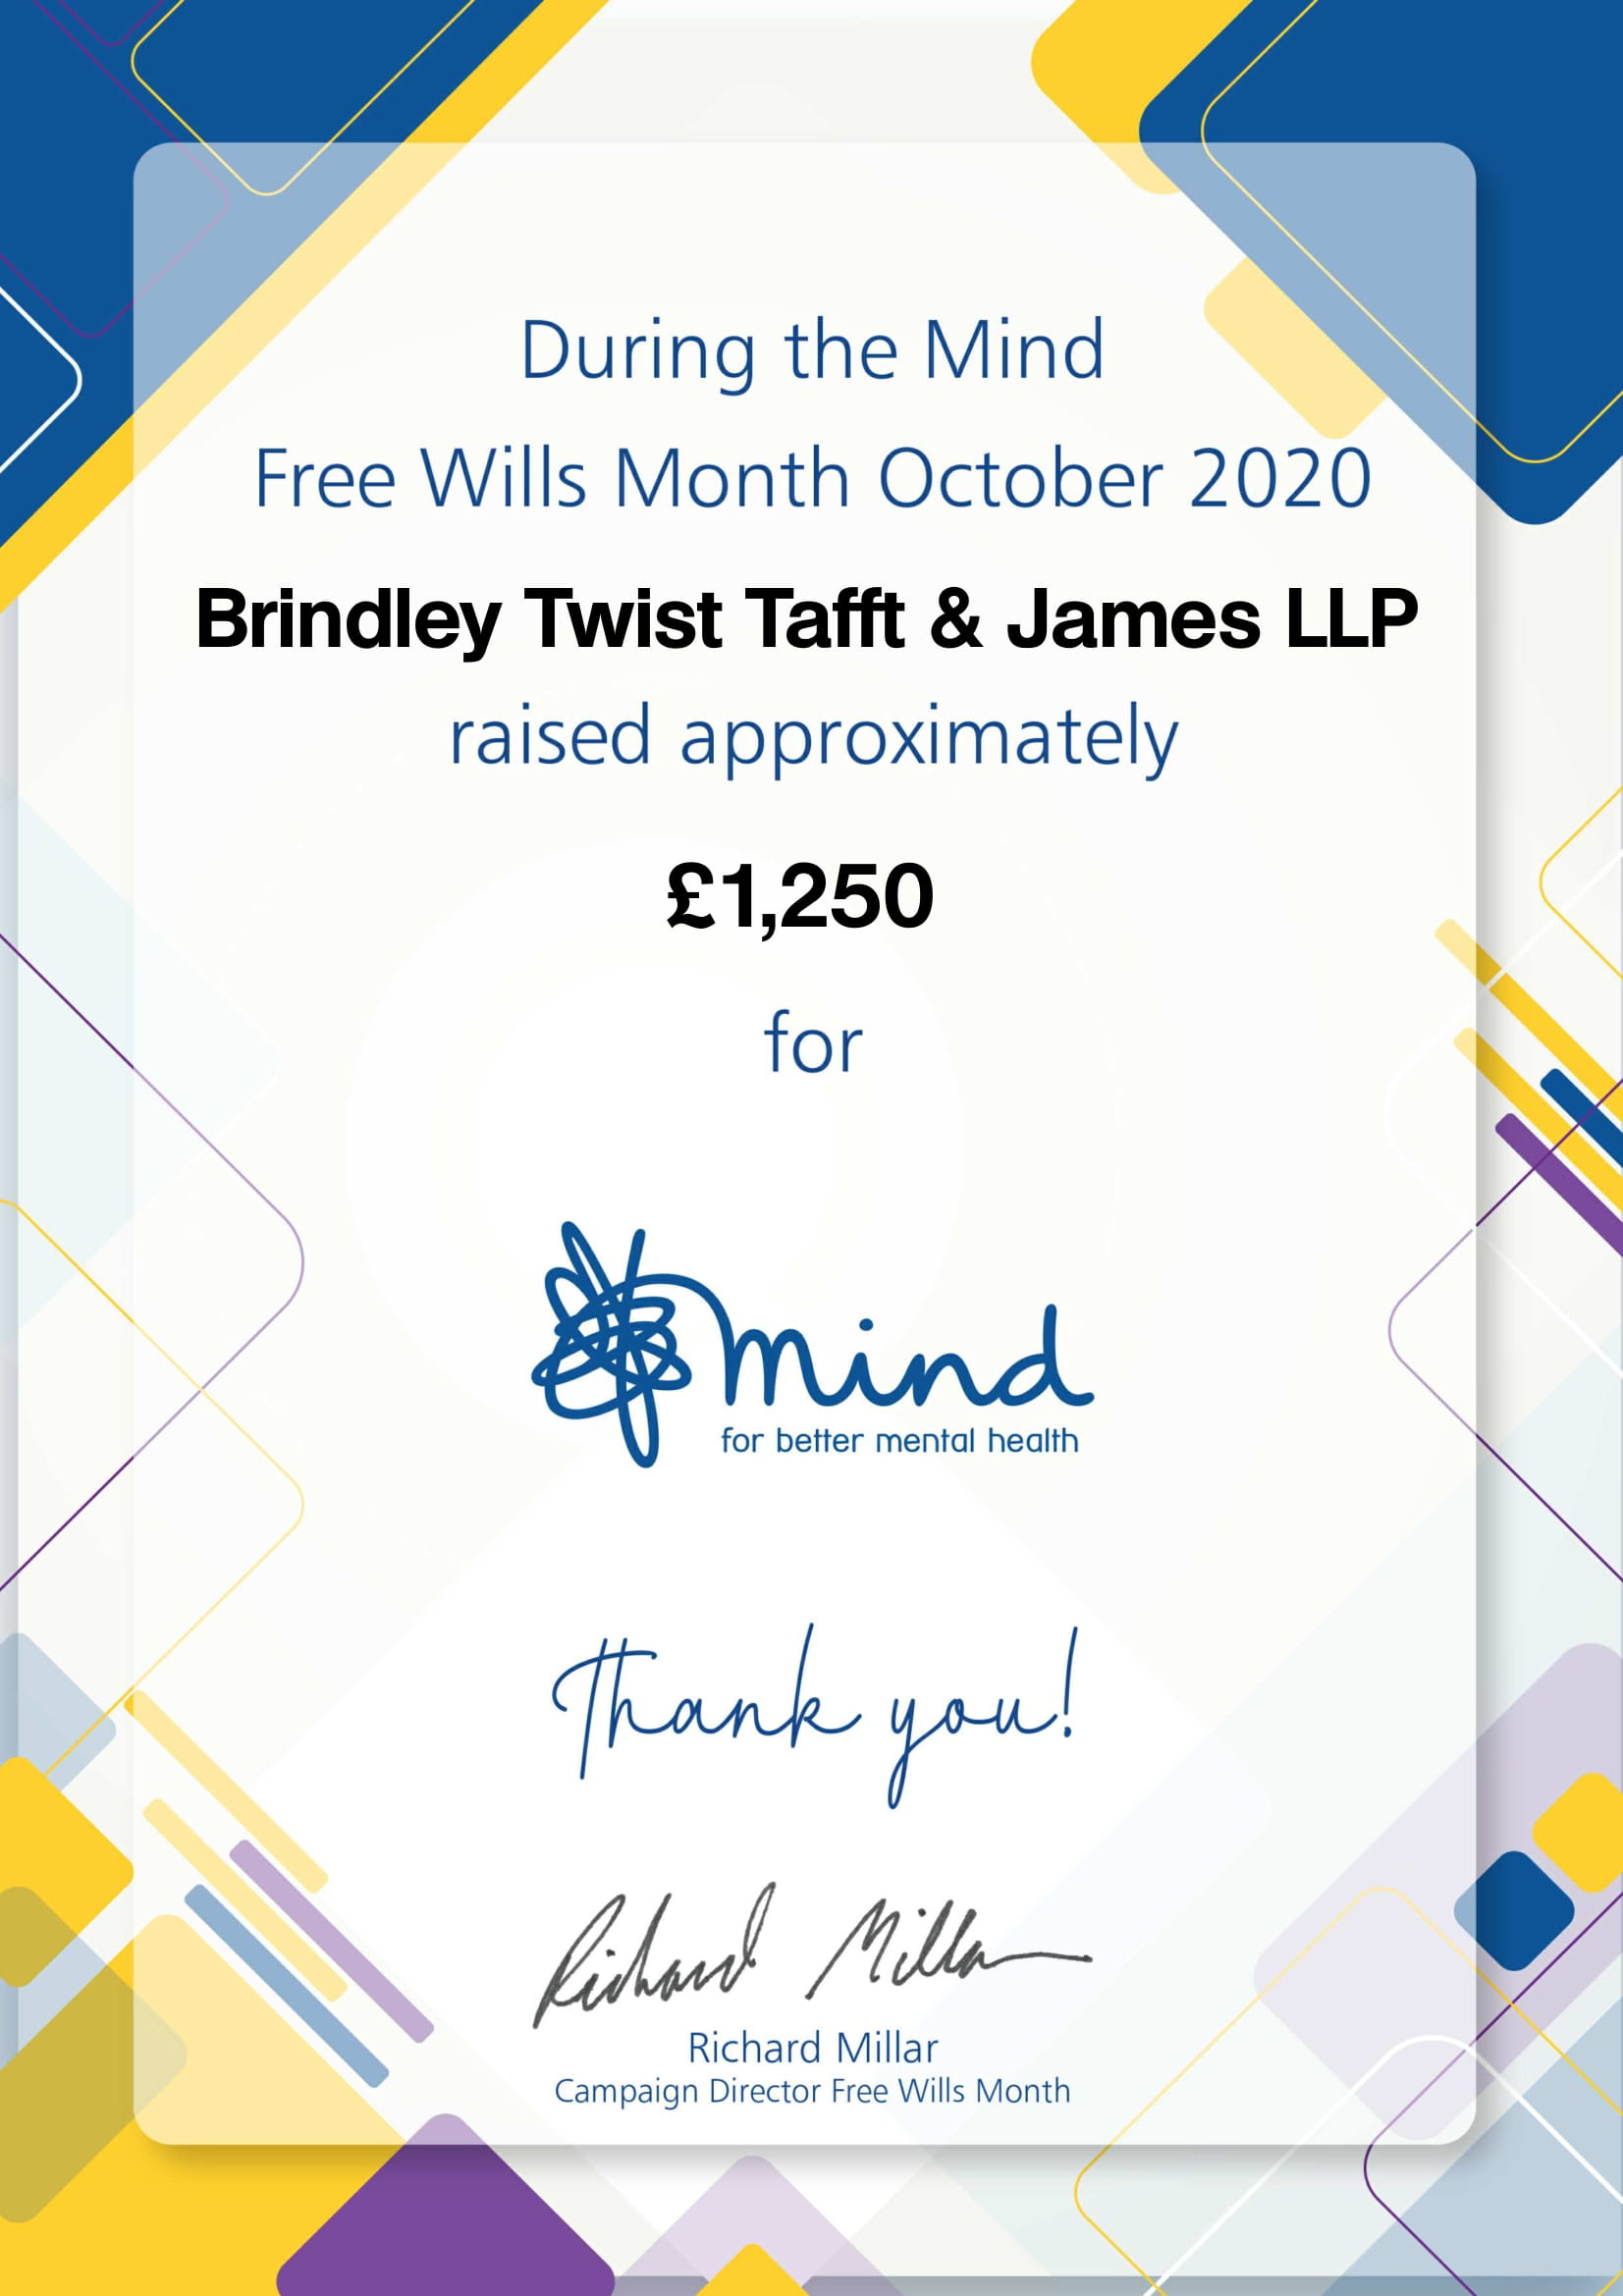 Fundraising for MIND